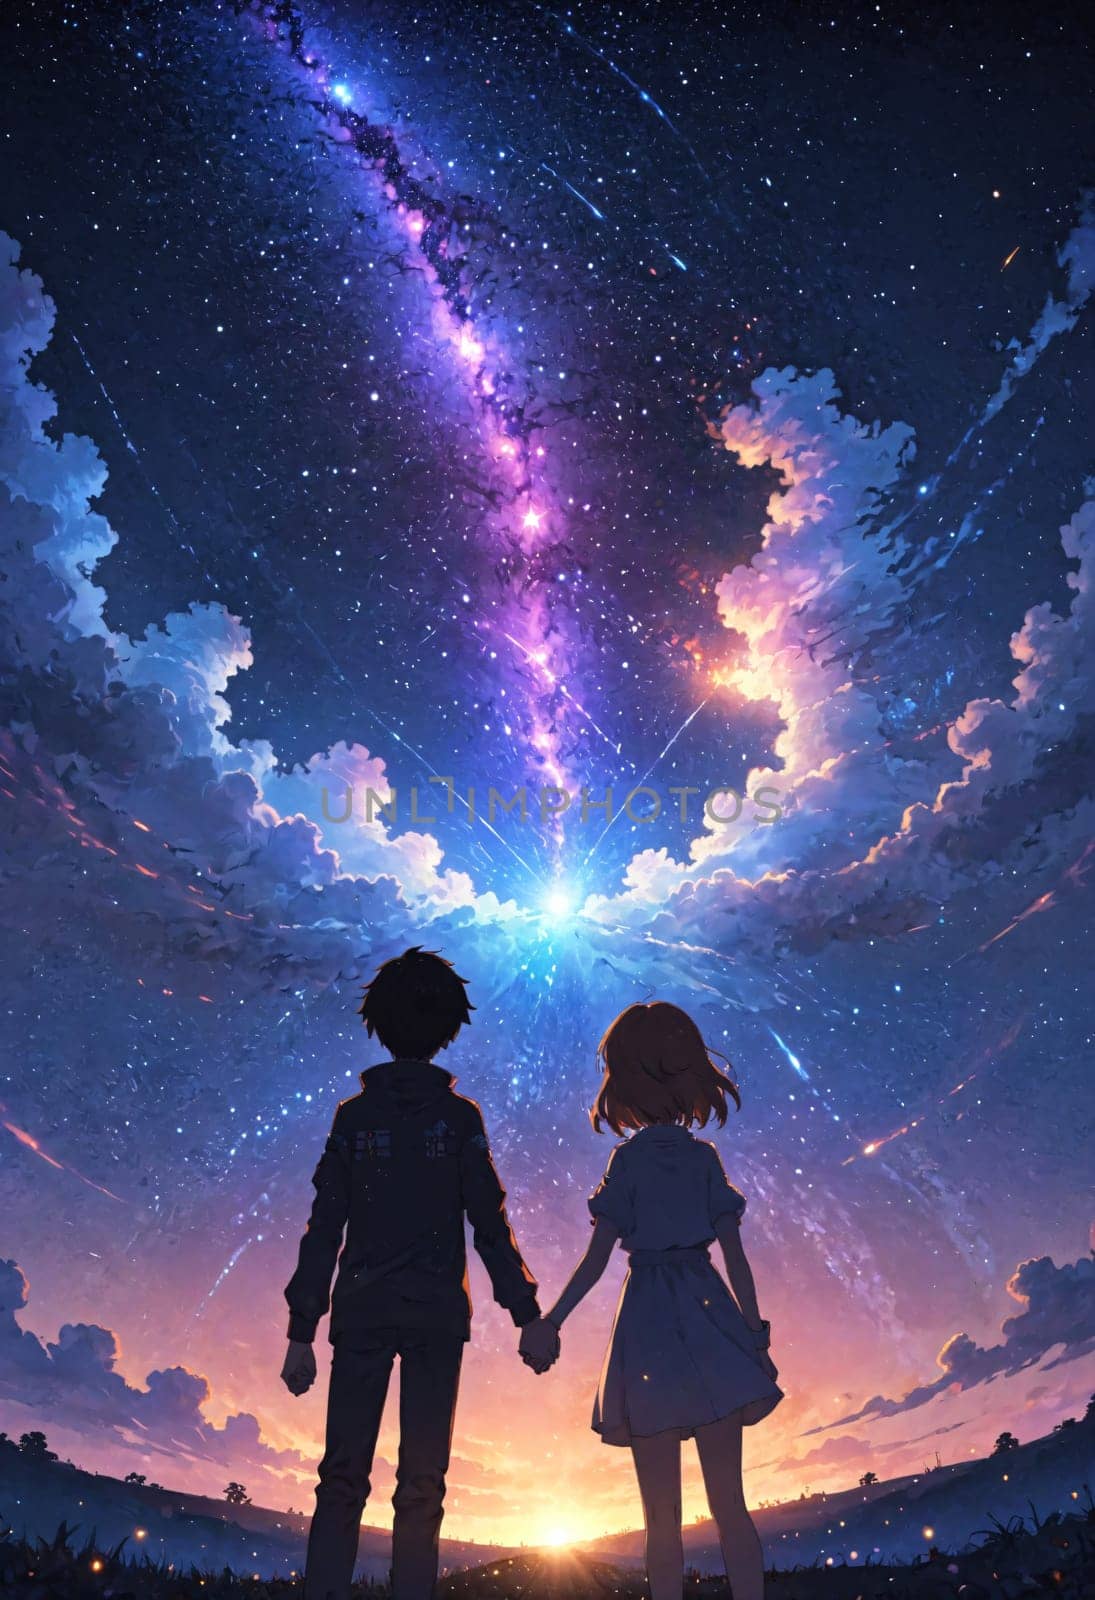 Two young people sharing a romantic moment, holding hands under the vast starry sky. The atmosphere is filled with love and happiness, surrounded by the beauty of nature